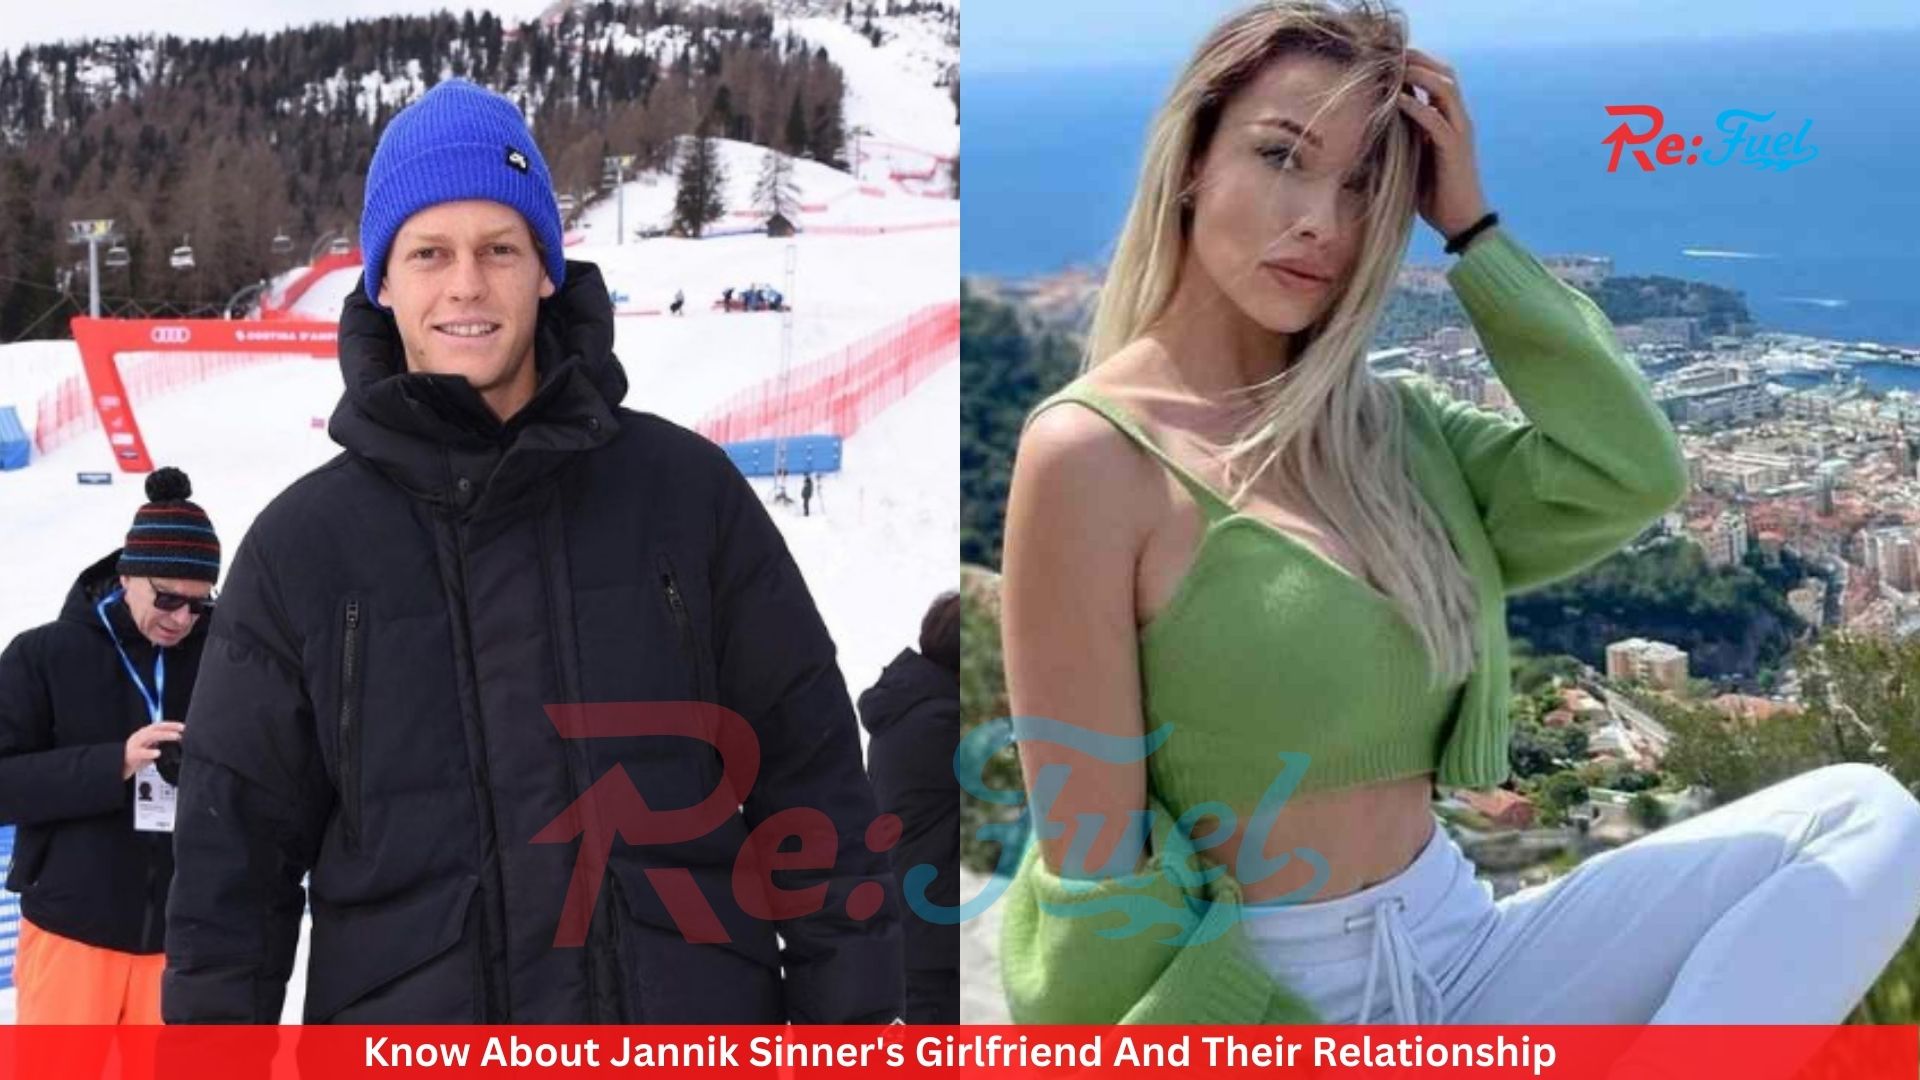 Know About Jannik Sinner's Girlfriend And Their Relationship